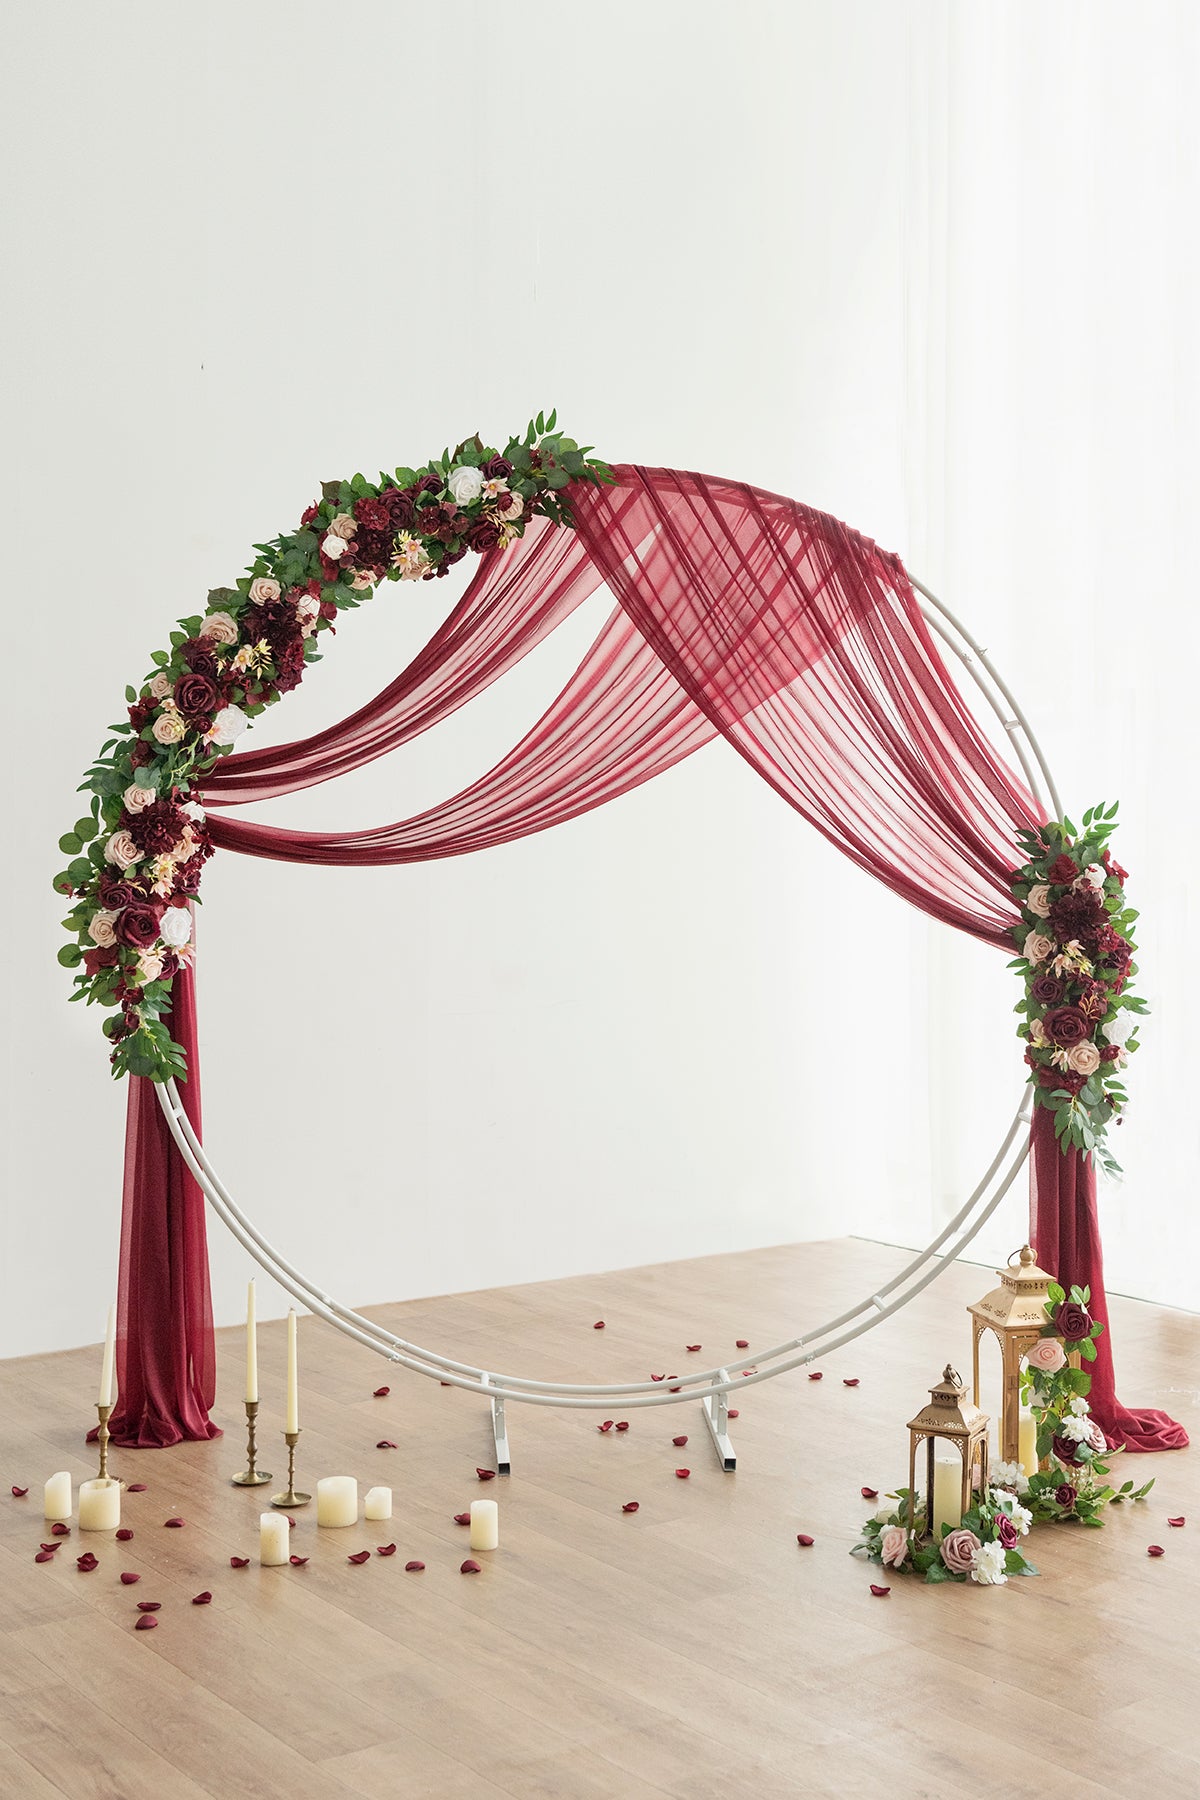 Flower Arrangements for Arch Decor in Romantic Marsala | Clearance